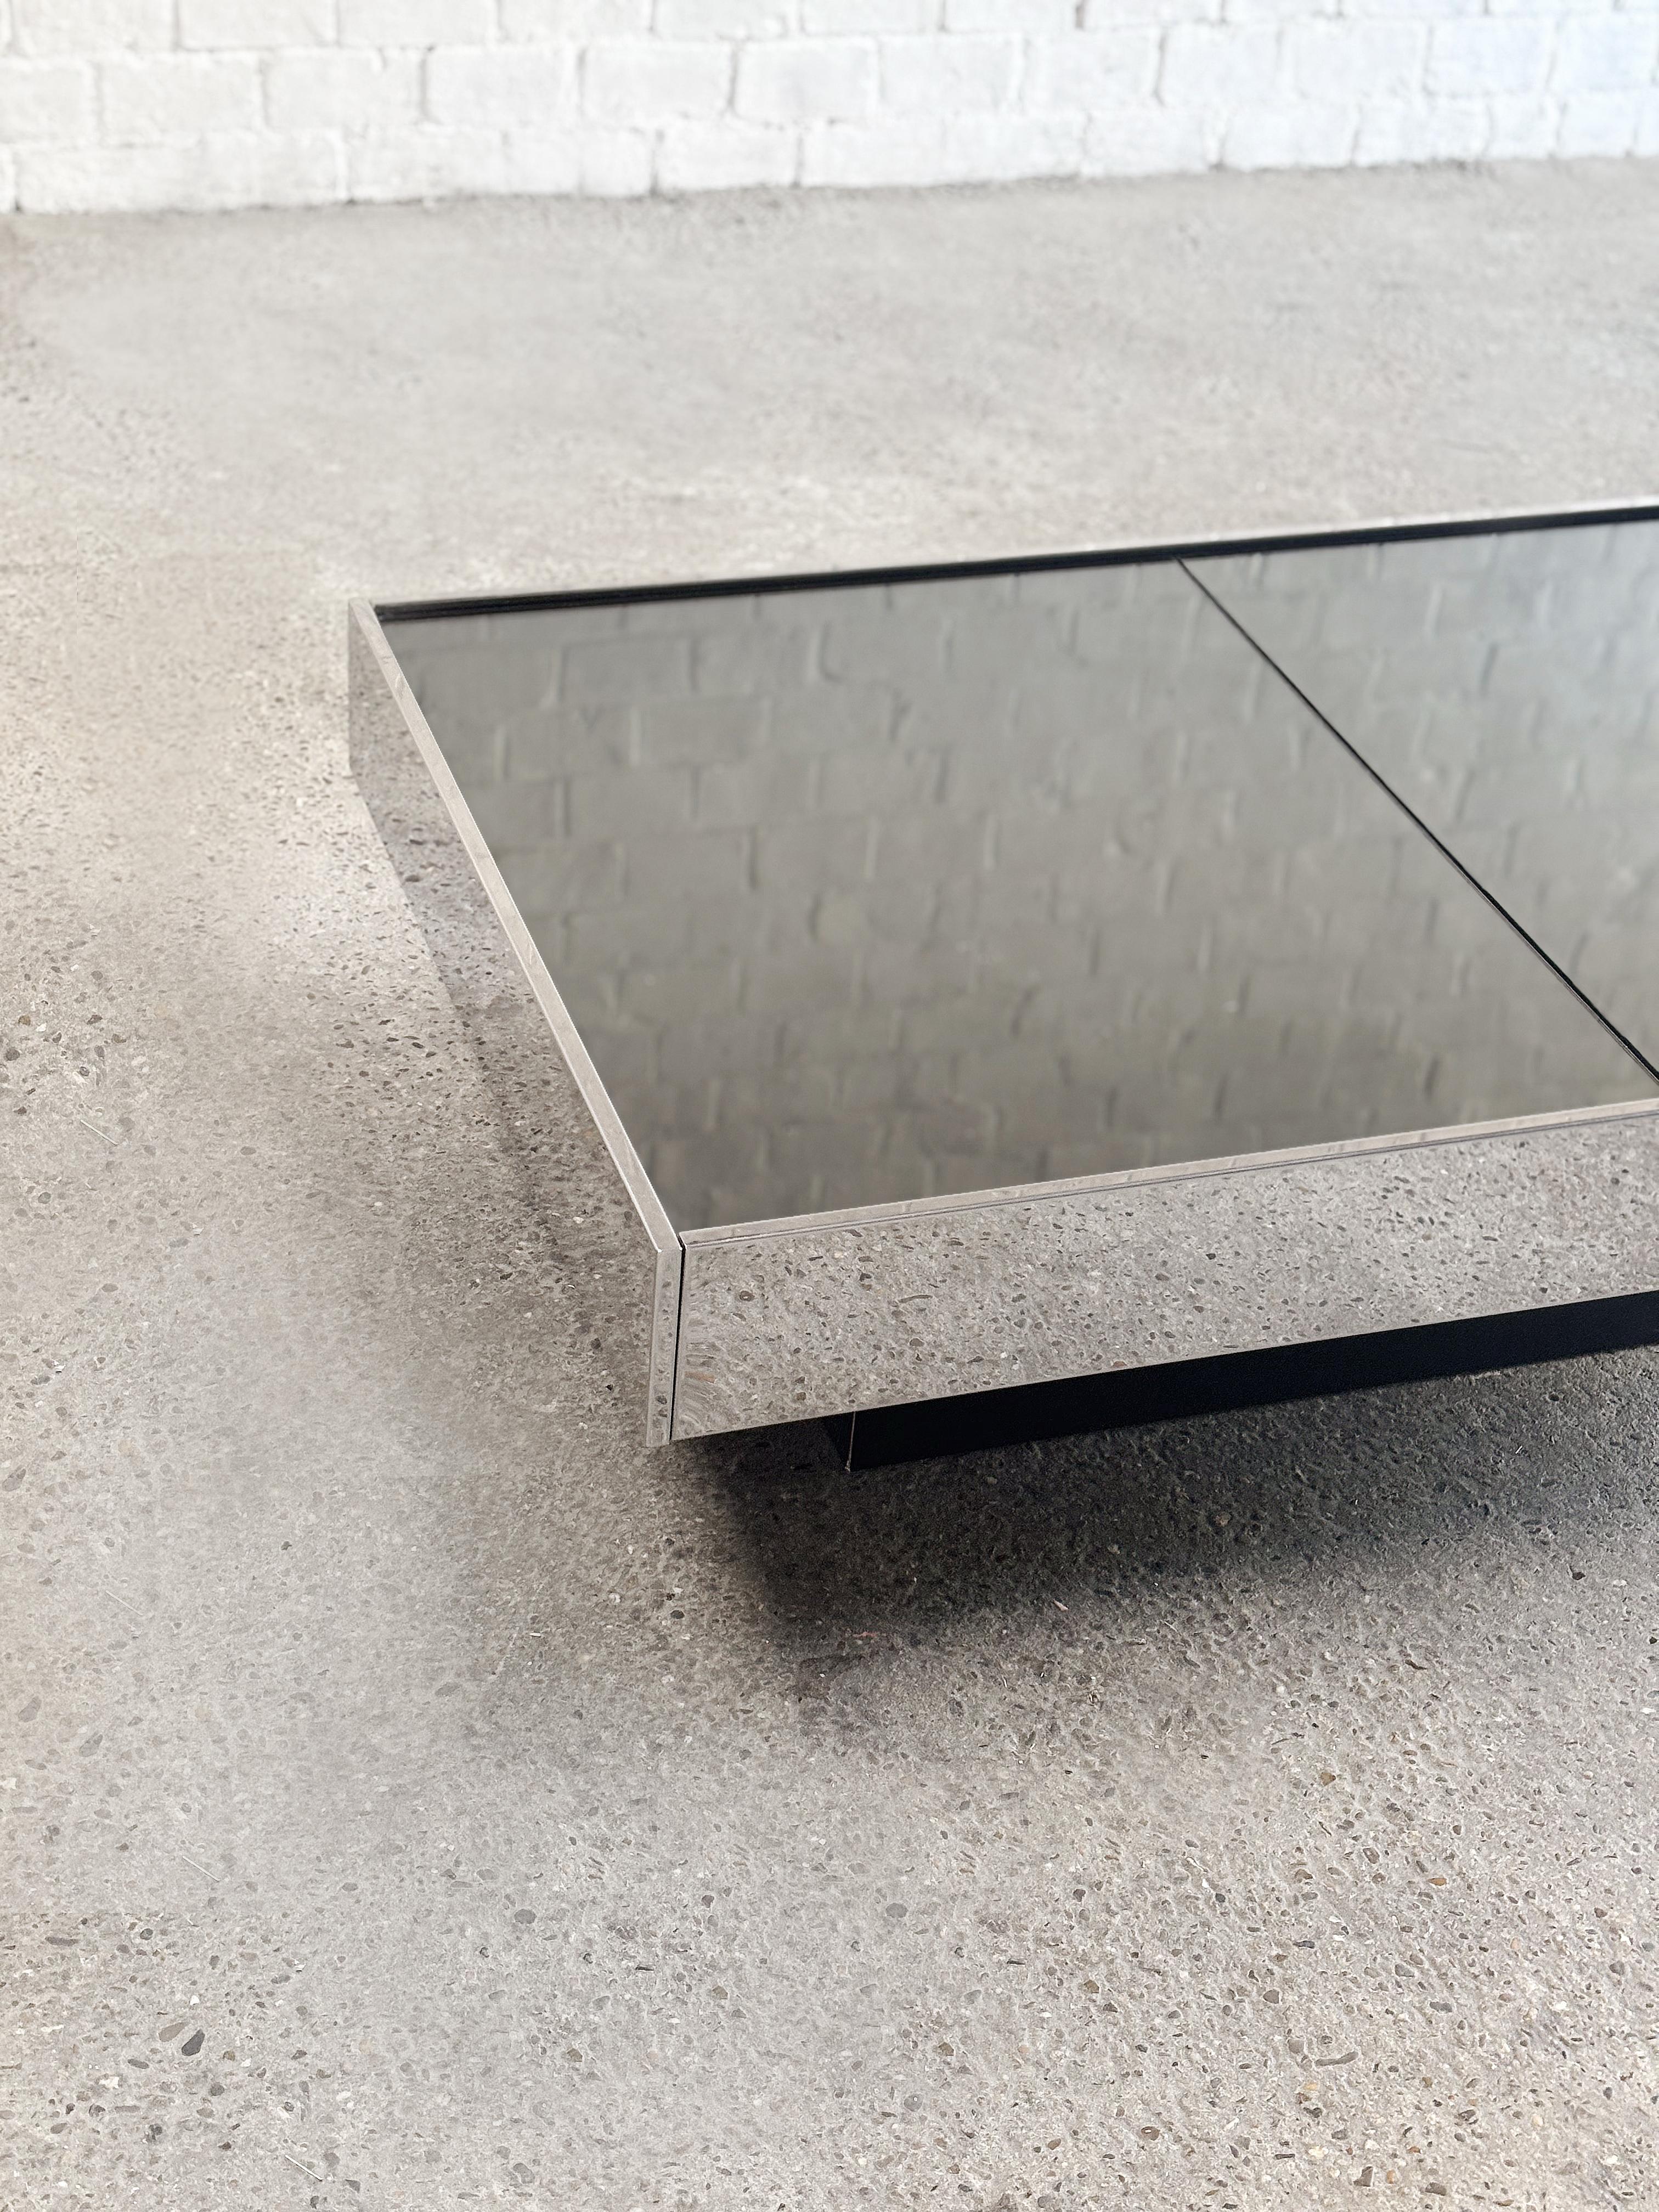 Willy Rizzo Extendable Coffee Table With Hidden Bar, Cidue, Italy 1970's In Good Condition In Zwijndrecht, Antwerp